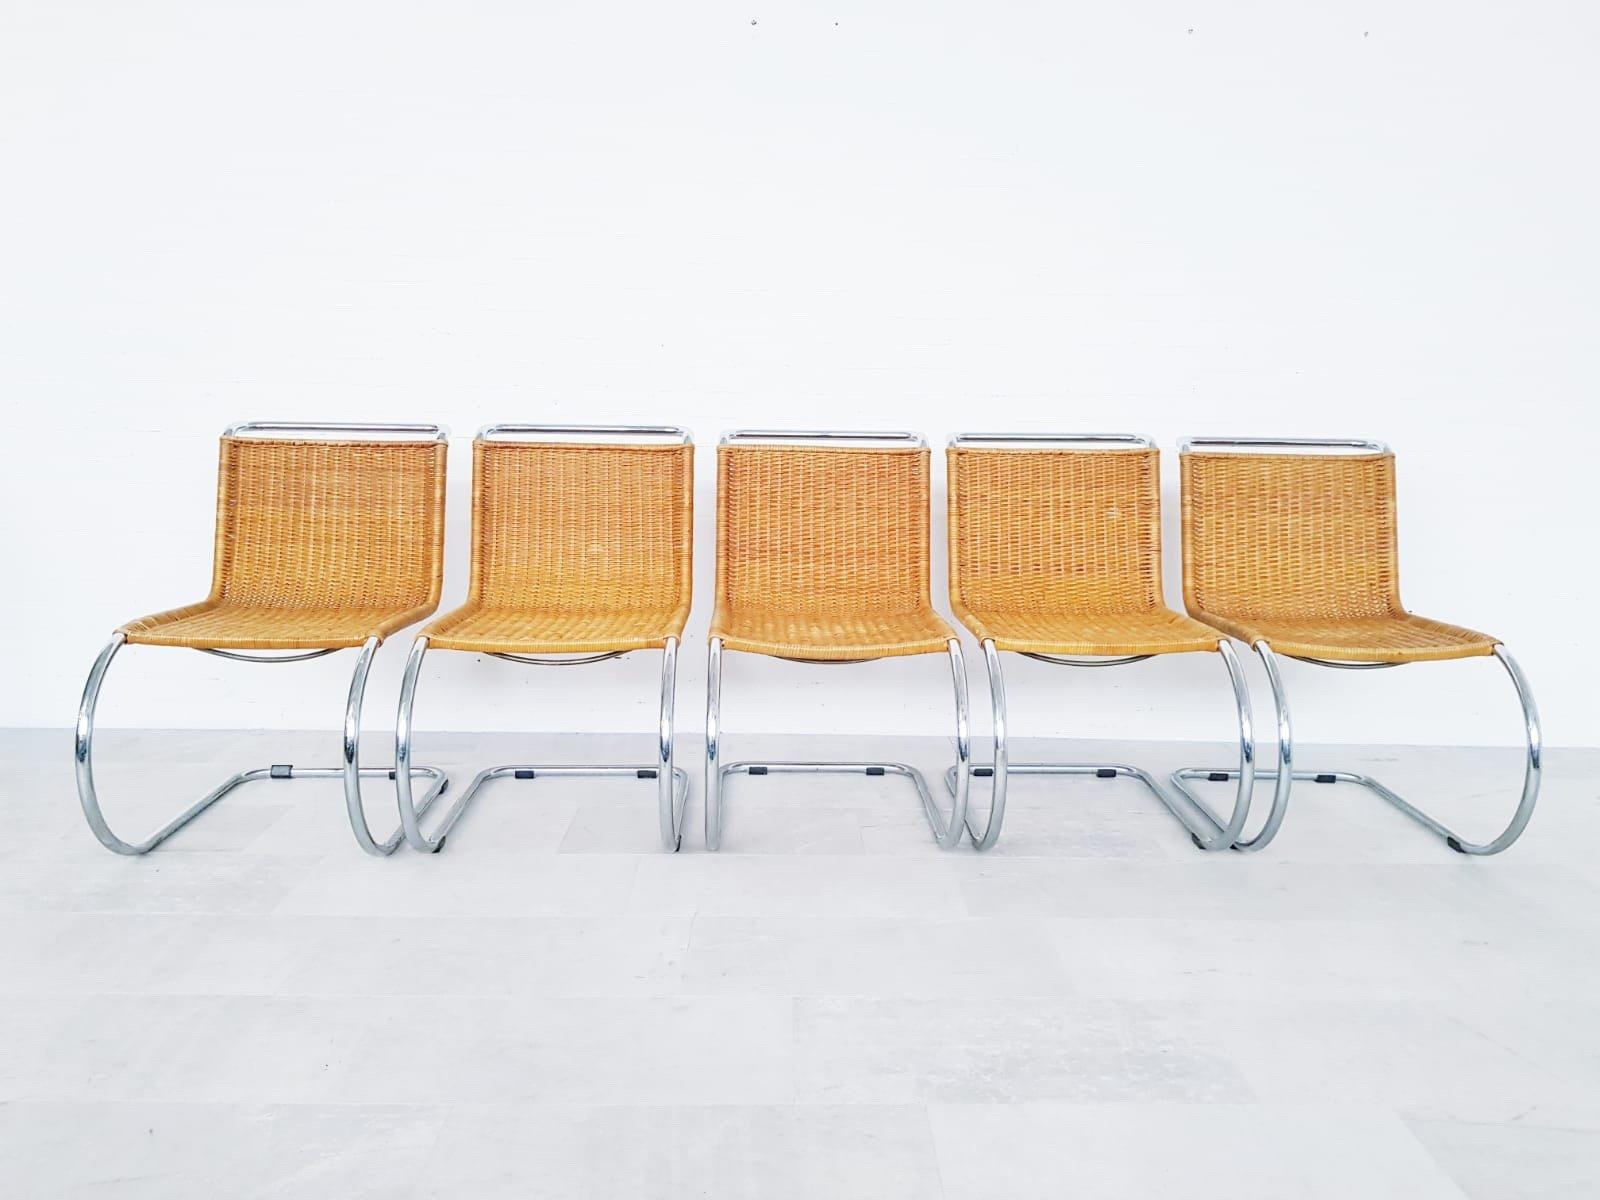 Late 20th Century Mies van der Rohe Cantilever Chairs for Thonet